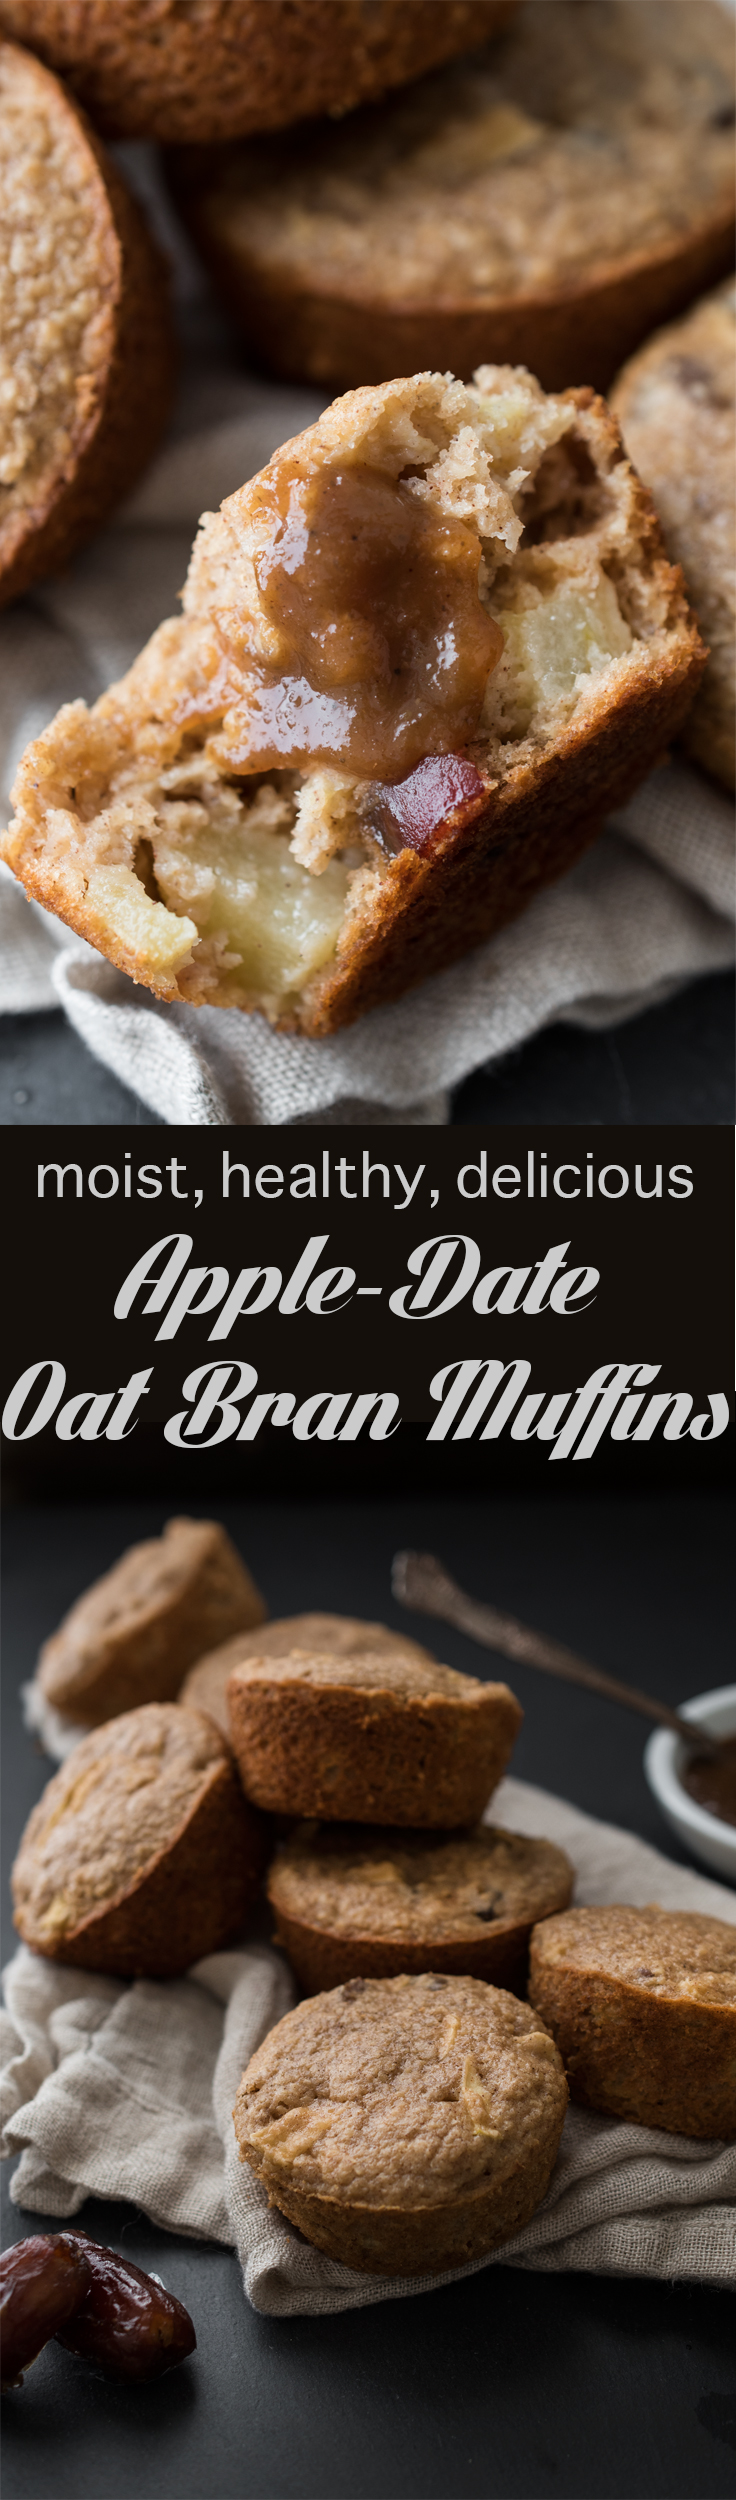 Moist, Delicious, & Healthy - Apple-Date Oat Bran Muffins with Apple Butter